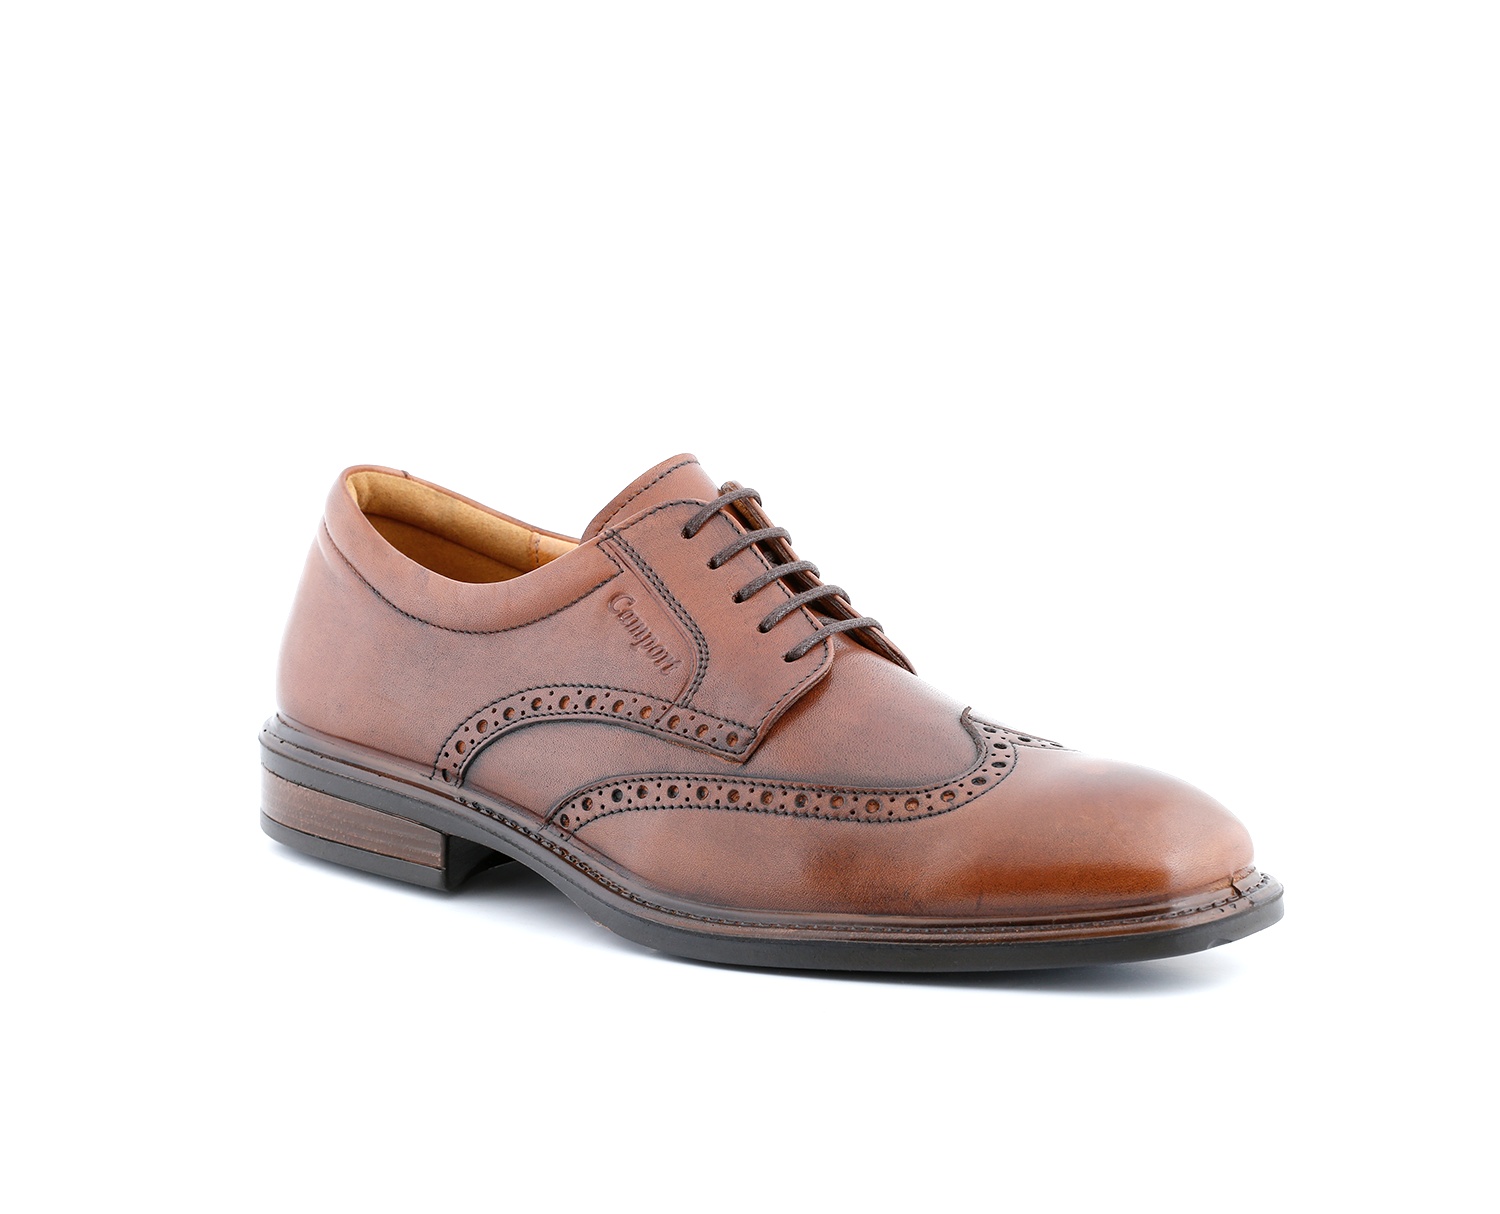 Sapato Oxford NEW NOBLEMAN OUT 20